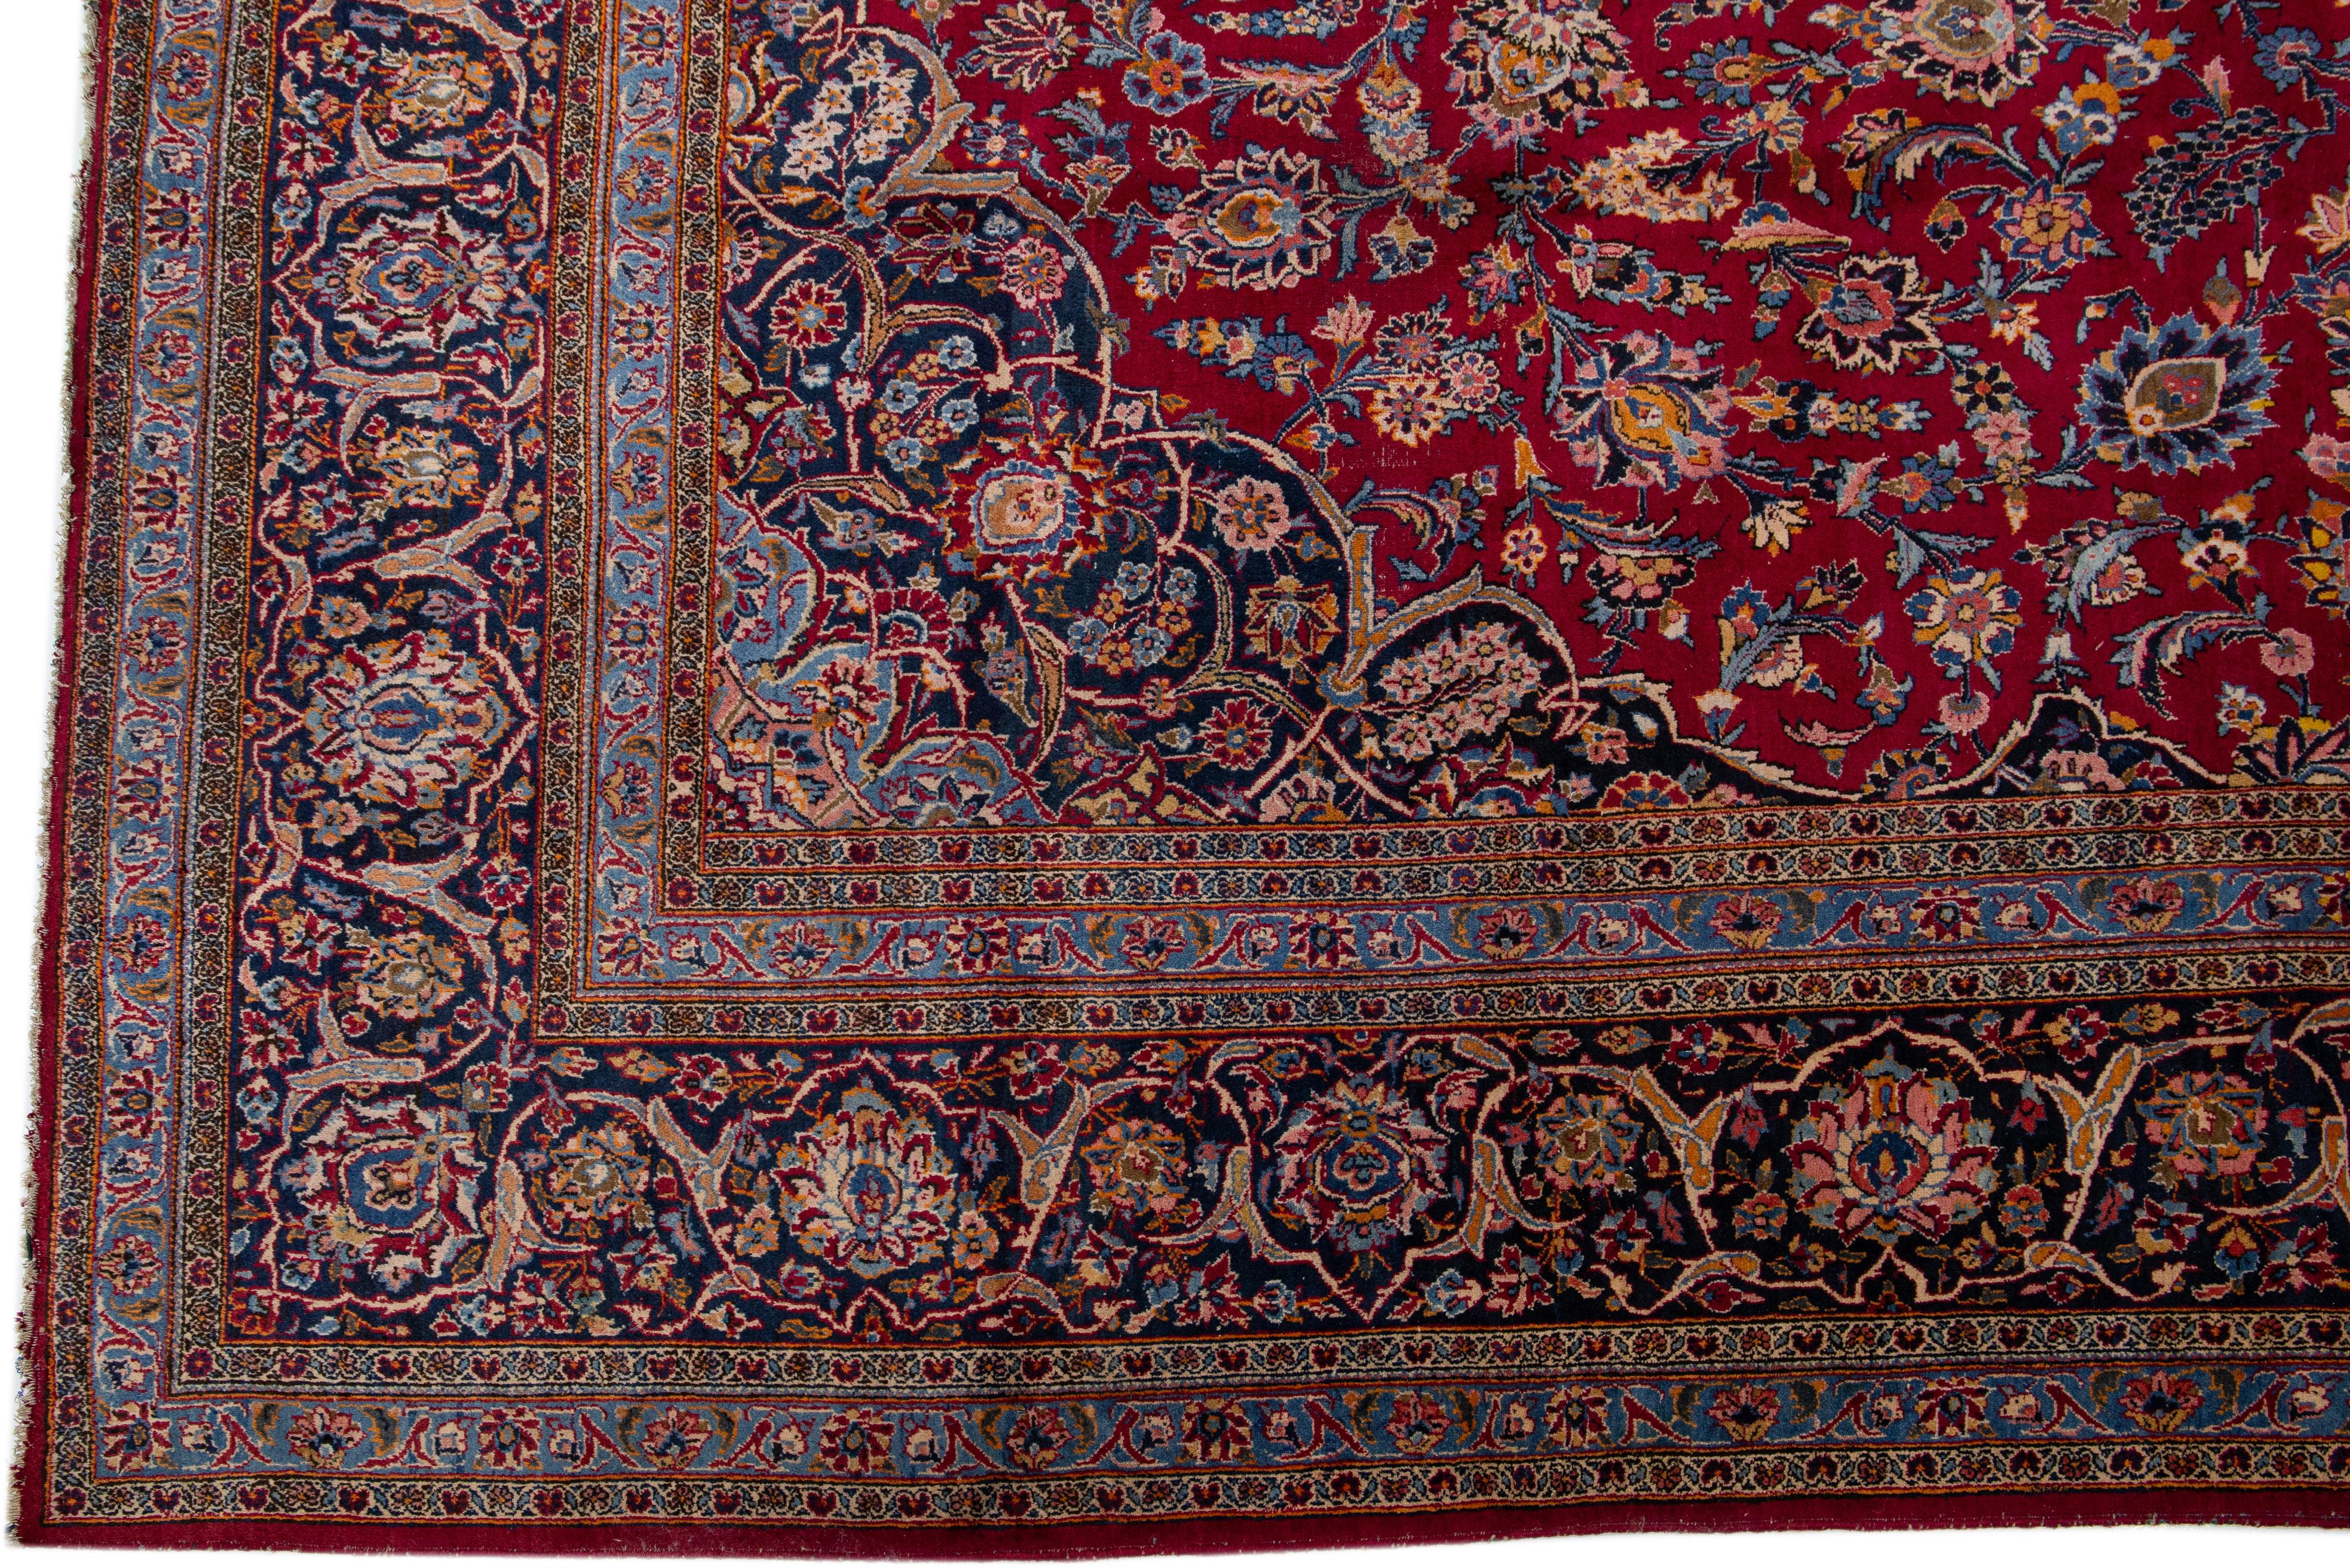 Oversize Antique Persian Kashan Red Wool Rug with Medallion Motif In Excellent Condition For Sale In Norwalk, CT